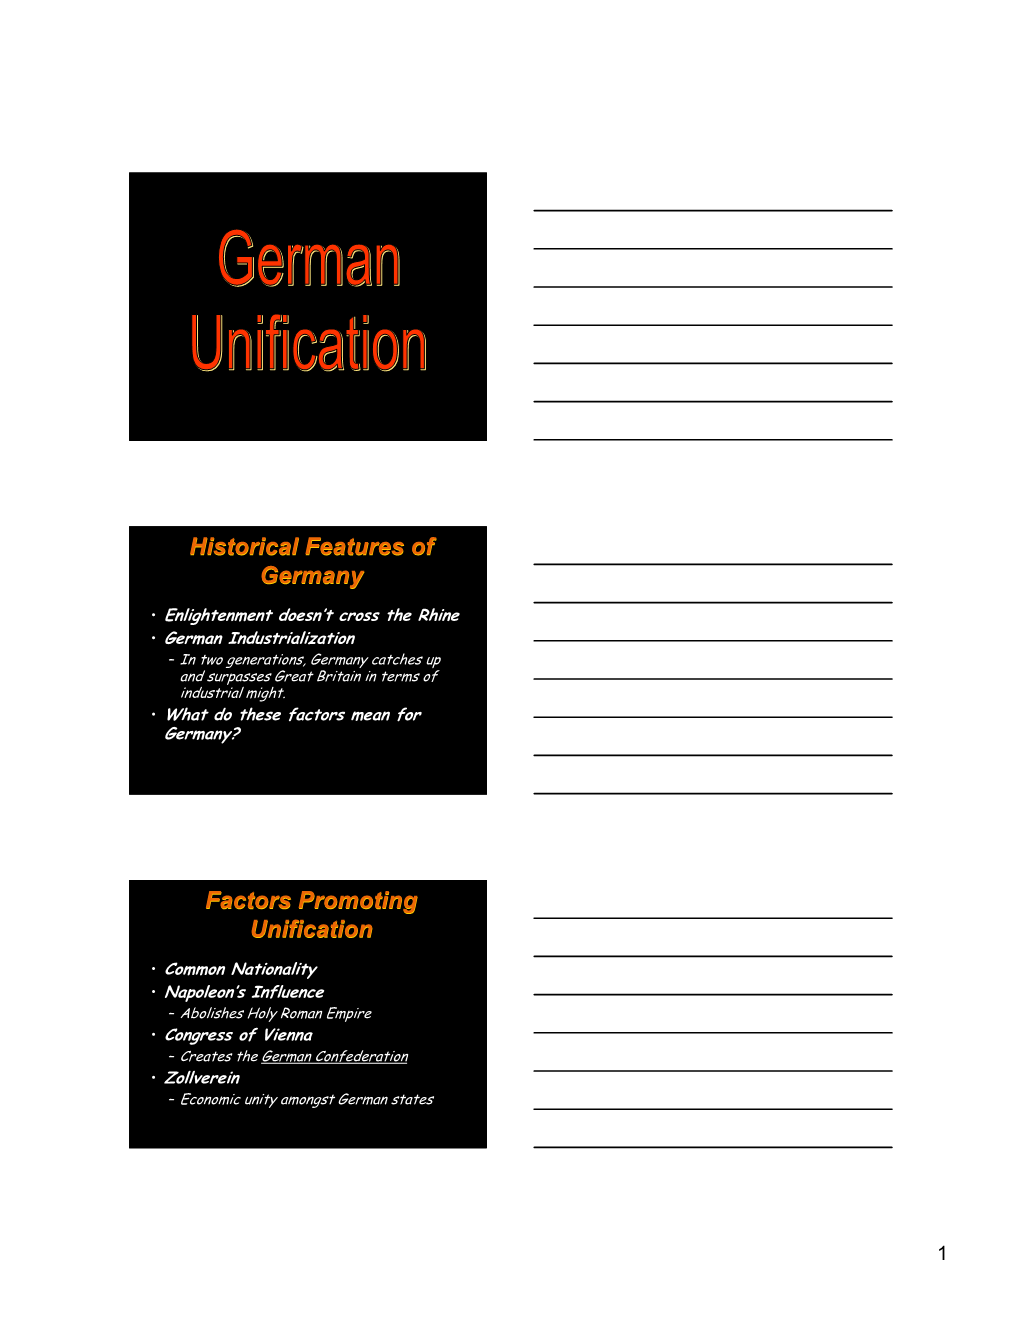 German Unification Notes